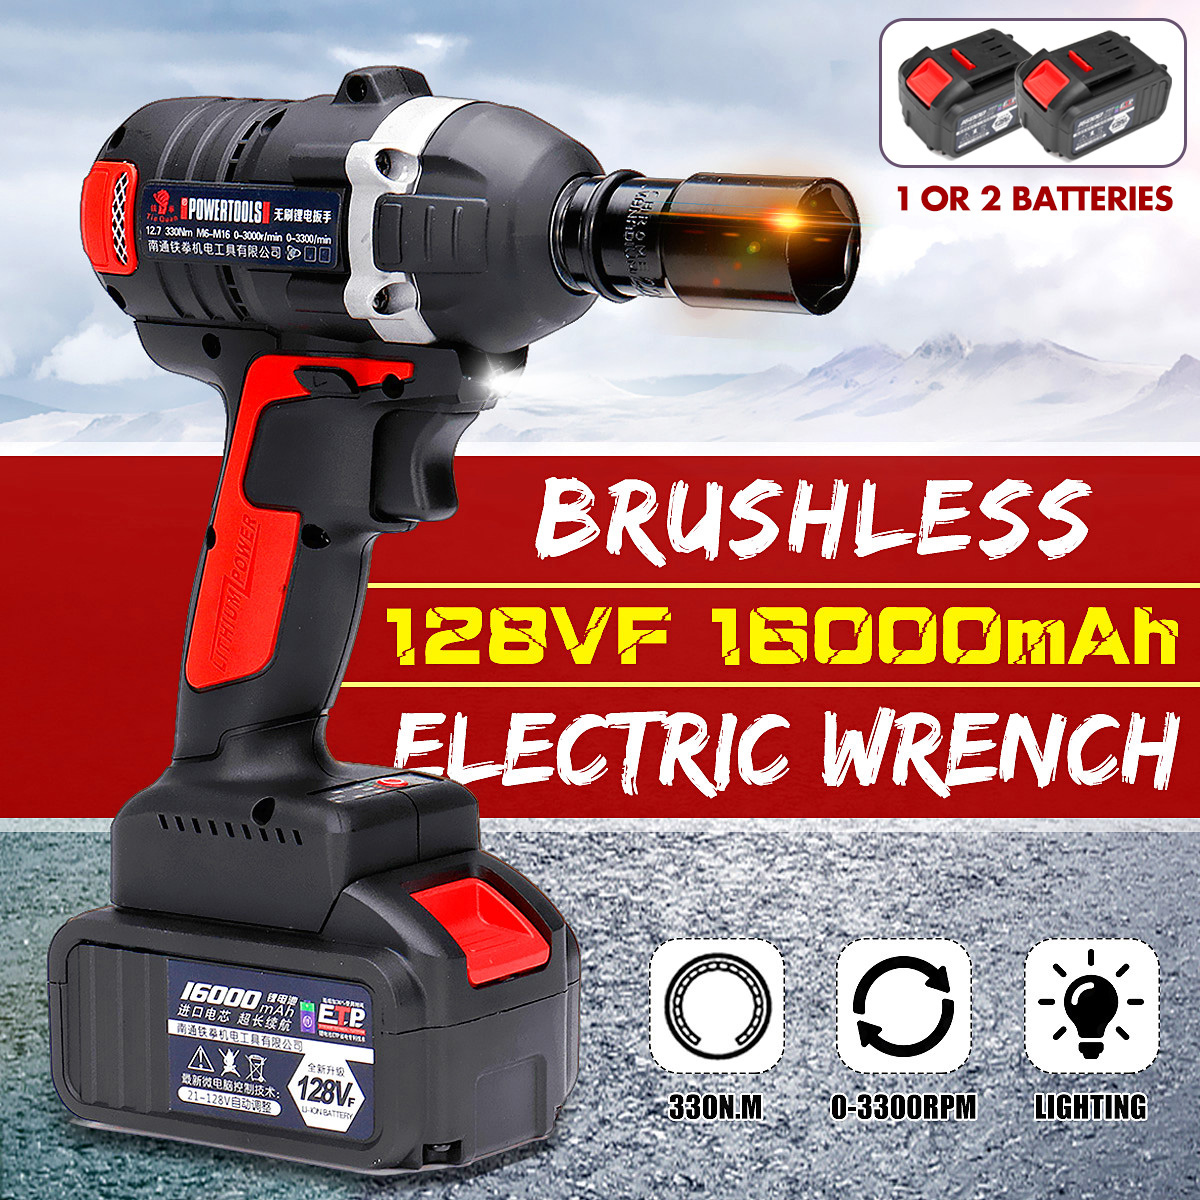 128VF-16000mah-Brushless-Electric-Wrench-Power-Wrench-Tool-330Nm-Cordless-Wrench-Kit-1437430-1